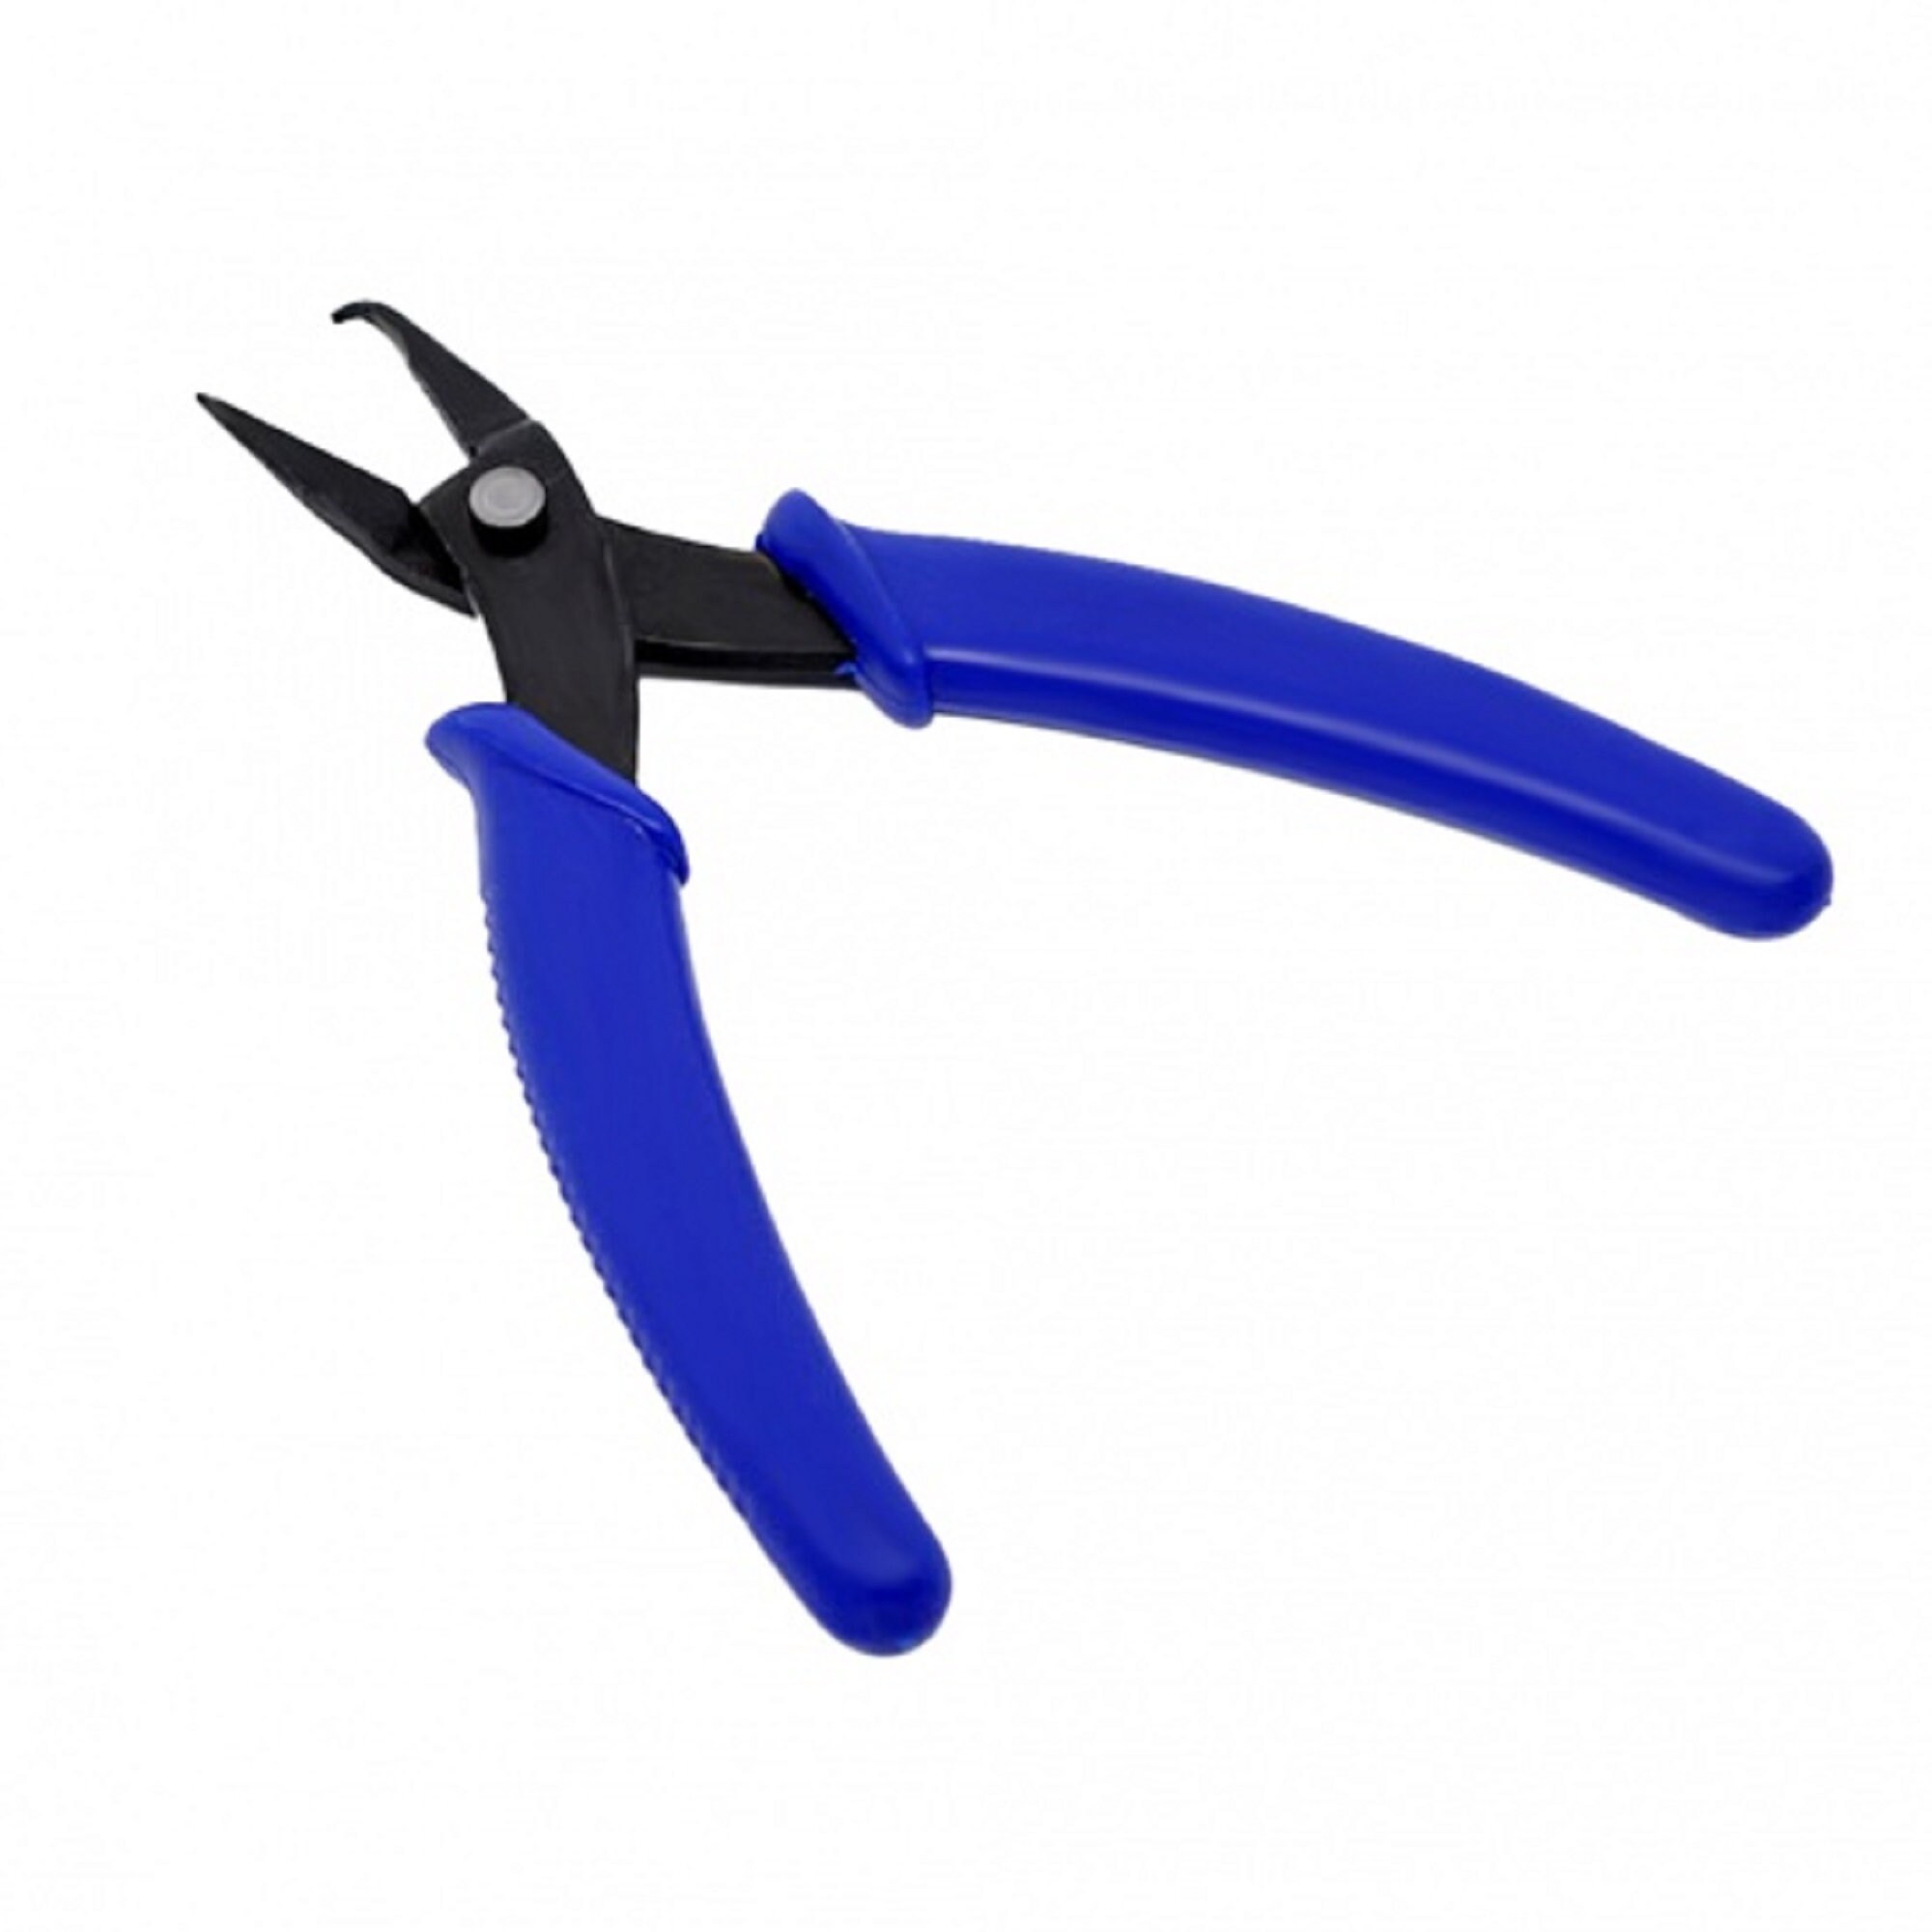 Split Ring Pliers for Jewelry Making Evatage 2Pcs Jump Ring Opening Pliers  for Opening Split Ring or Key Chain Opener Tools for Jewelry Beading Repair  Making Supplies 2 Pairs